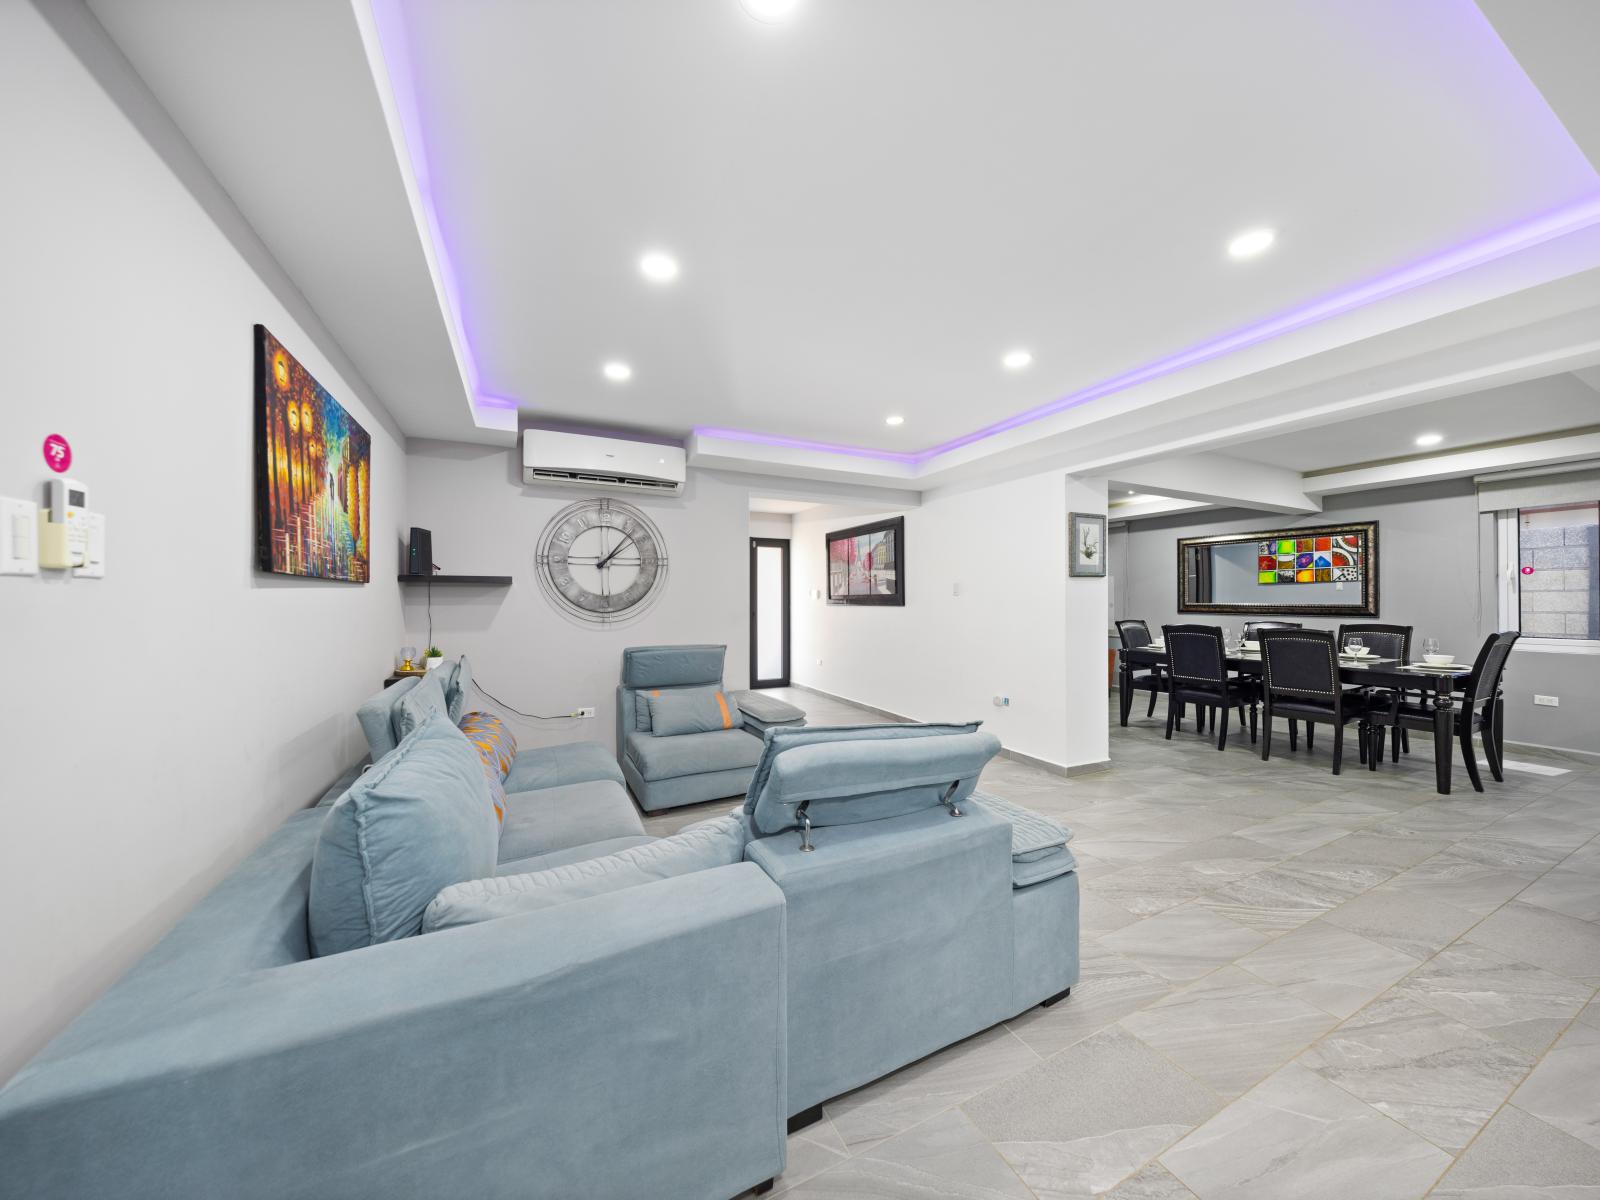 Enjoy ease of interaction in the open concept living and dining area of the home in Aruba - A welcoming space where you can create cherished memories with loved ones - A serene ambiance perfect for unwinding after a day of adventure